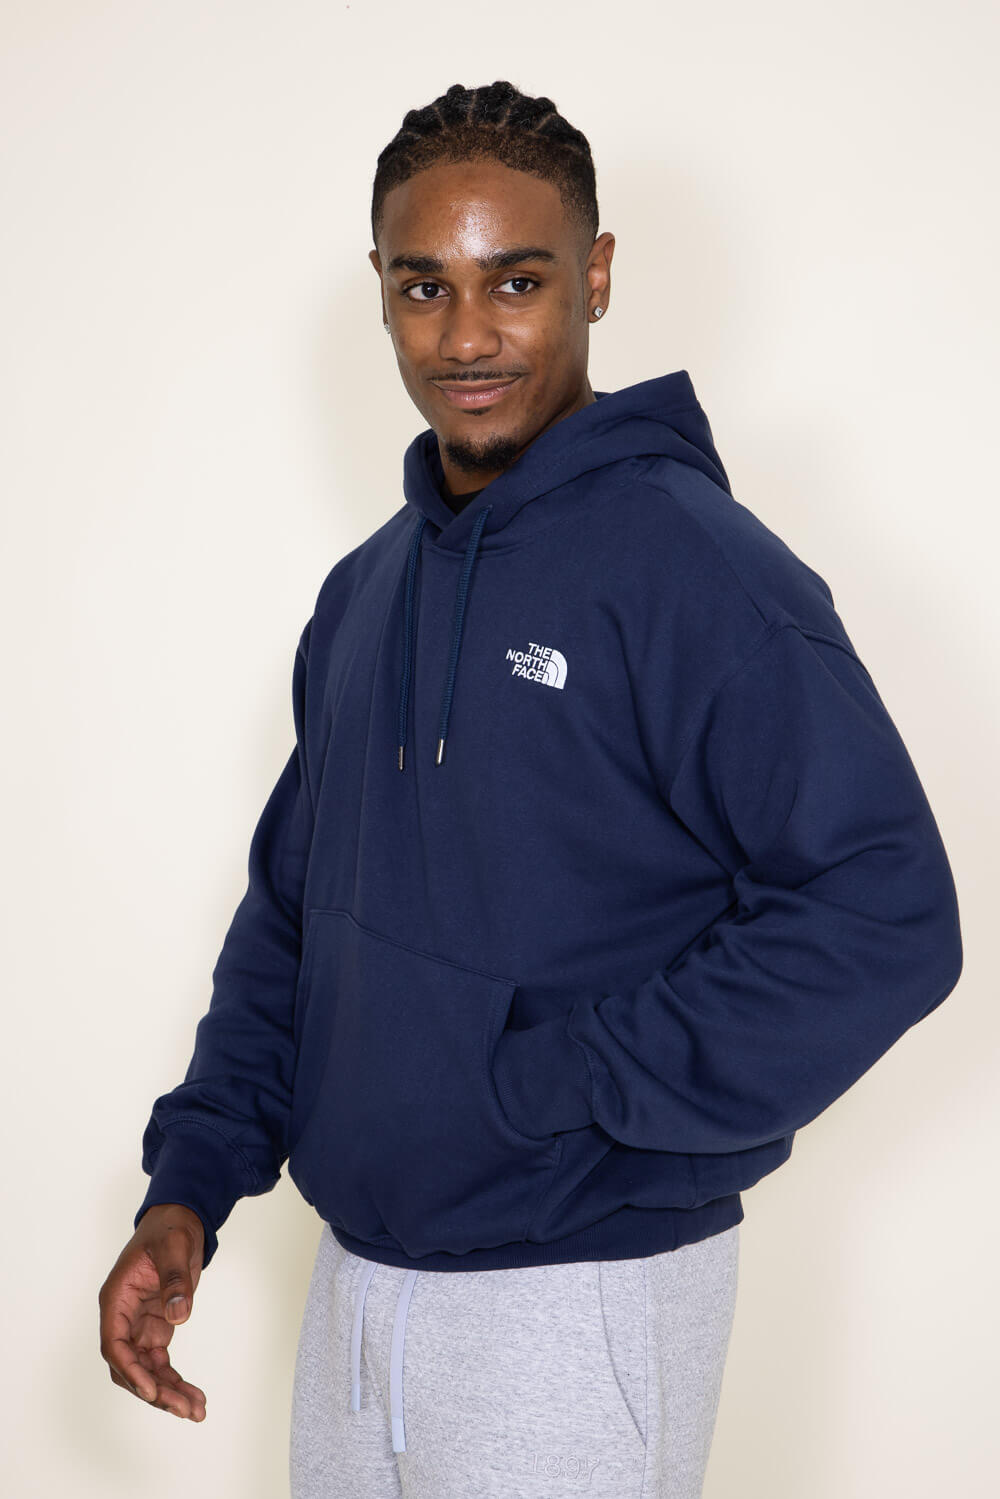 Navy Embroidered Hoodie by drew house on Sale